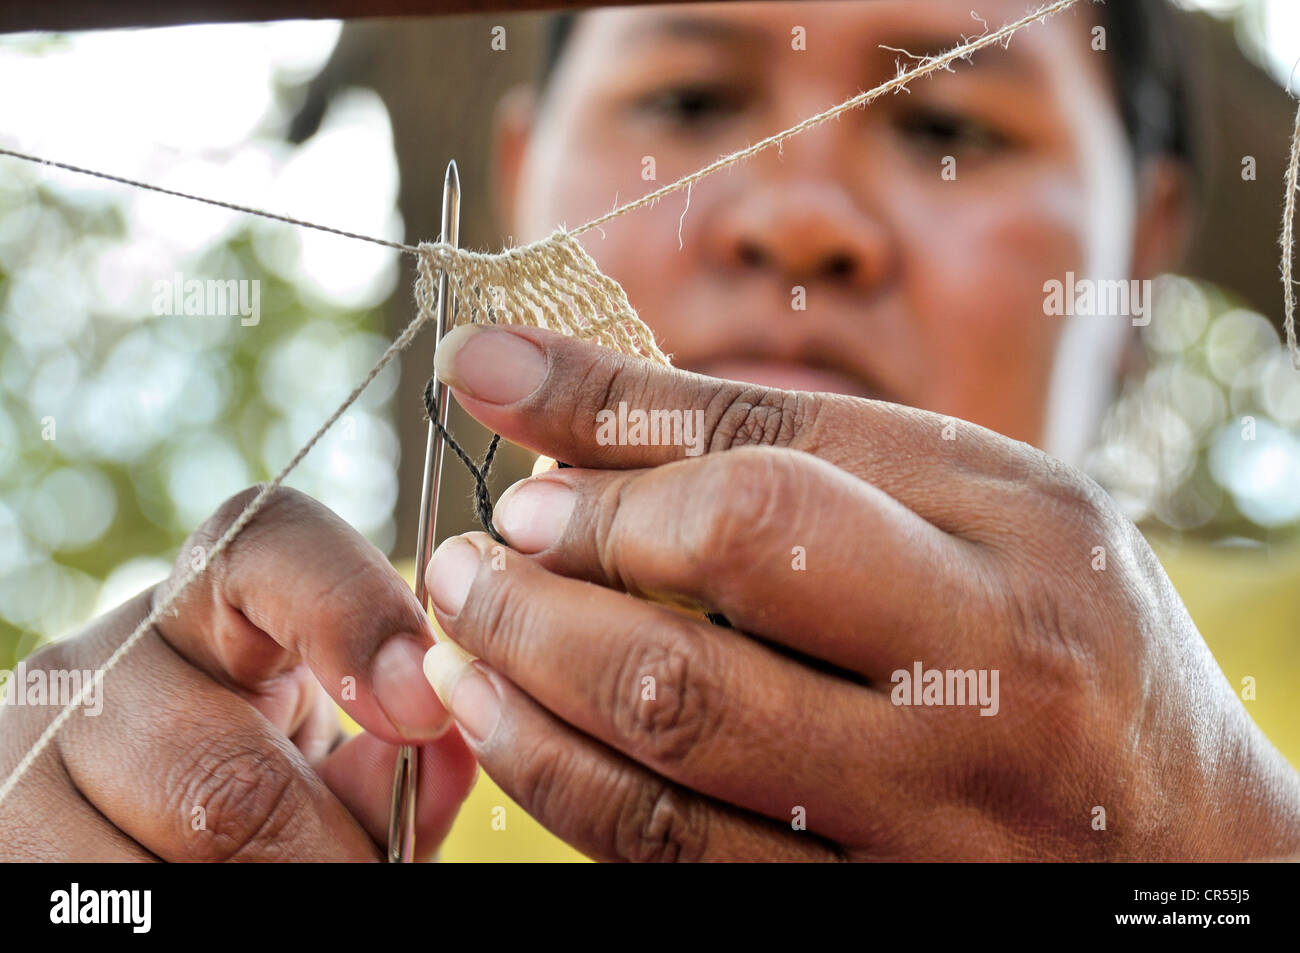 Indigenous woman from the Wichi Indians tribe creating handicrafts from the fibres of the Chaguar Bromeliad (Bromelia Stock Photo